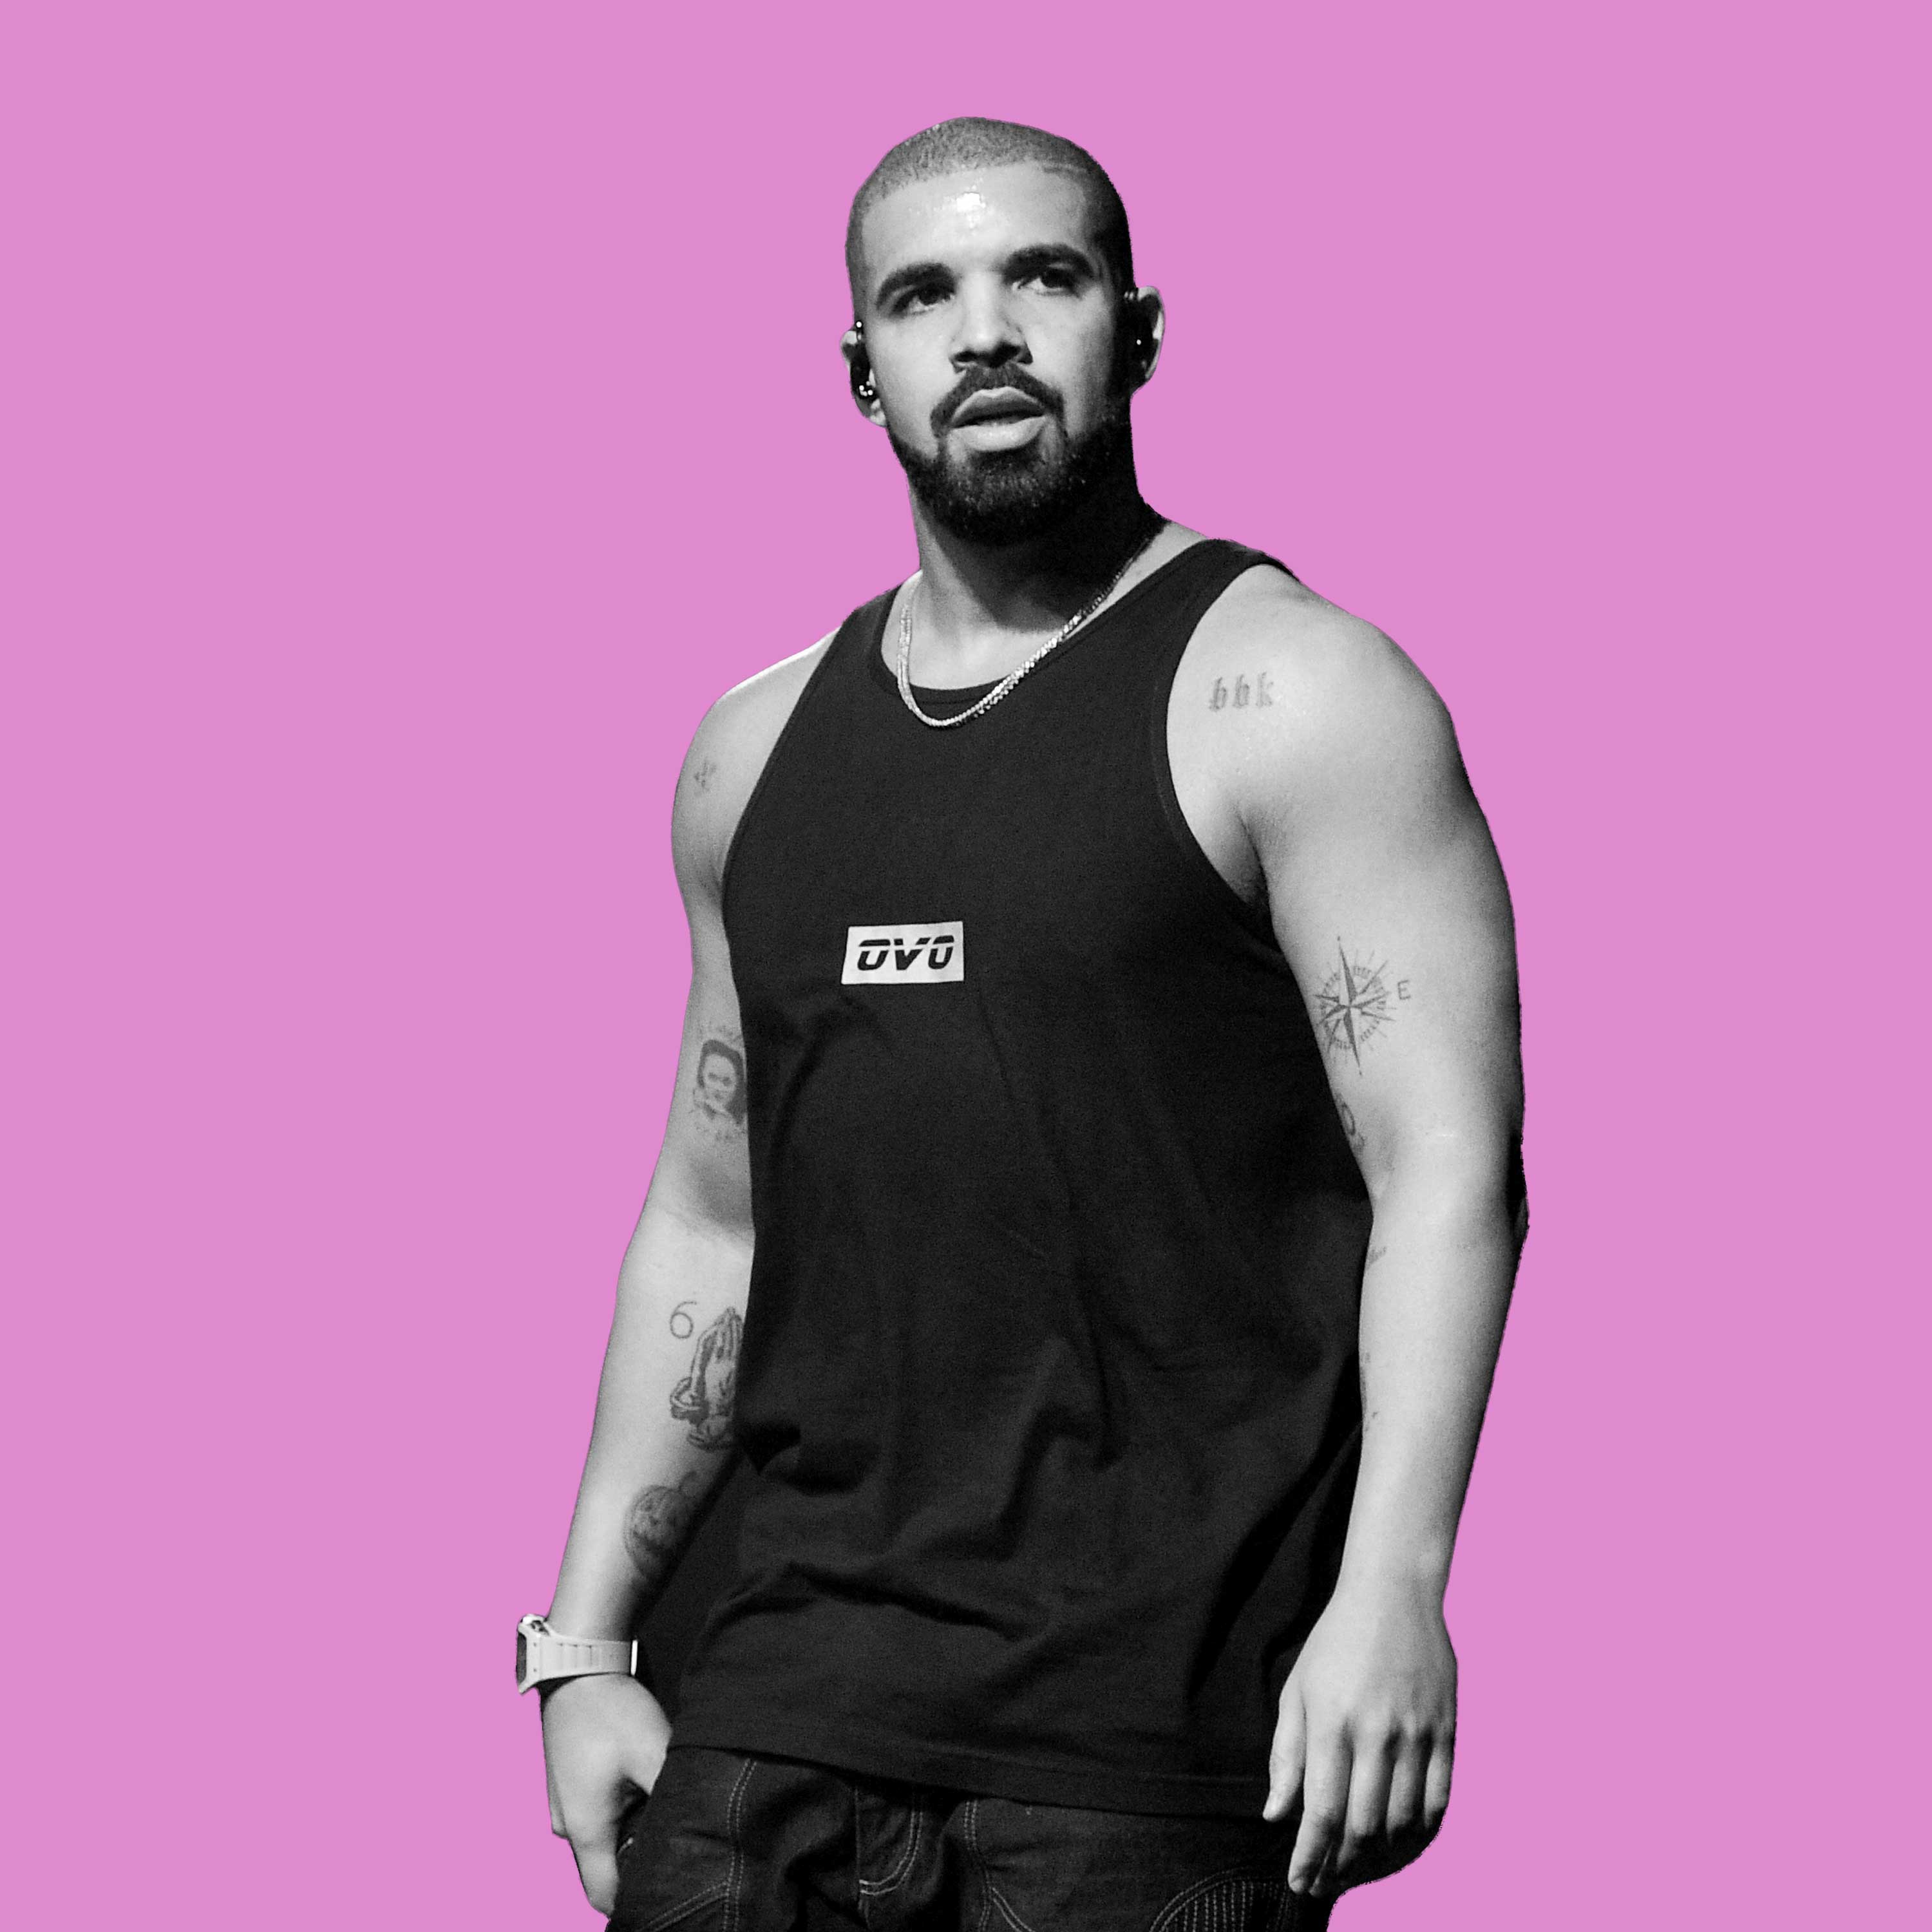 Drake Fans Think They’ve Uncovered Who The Real “Kiki” Is